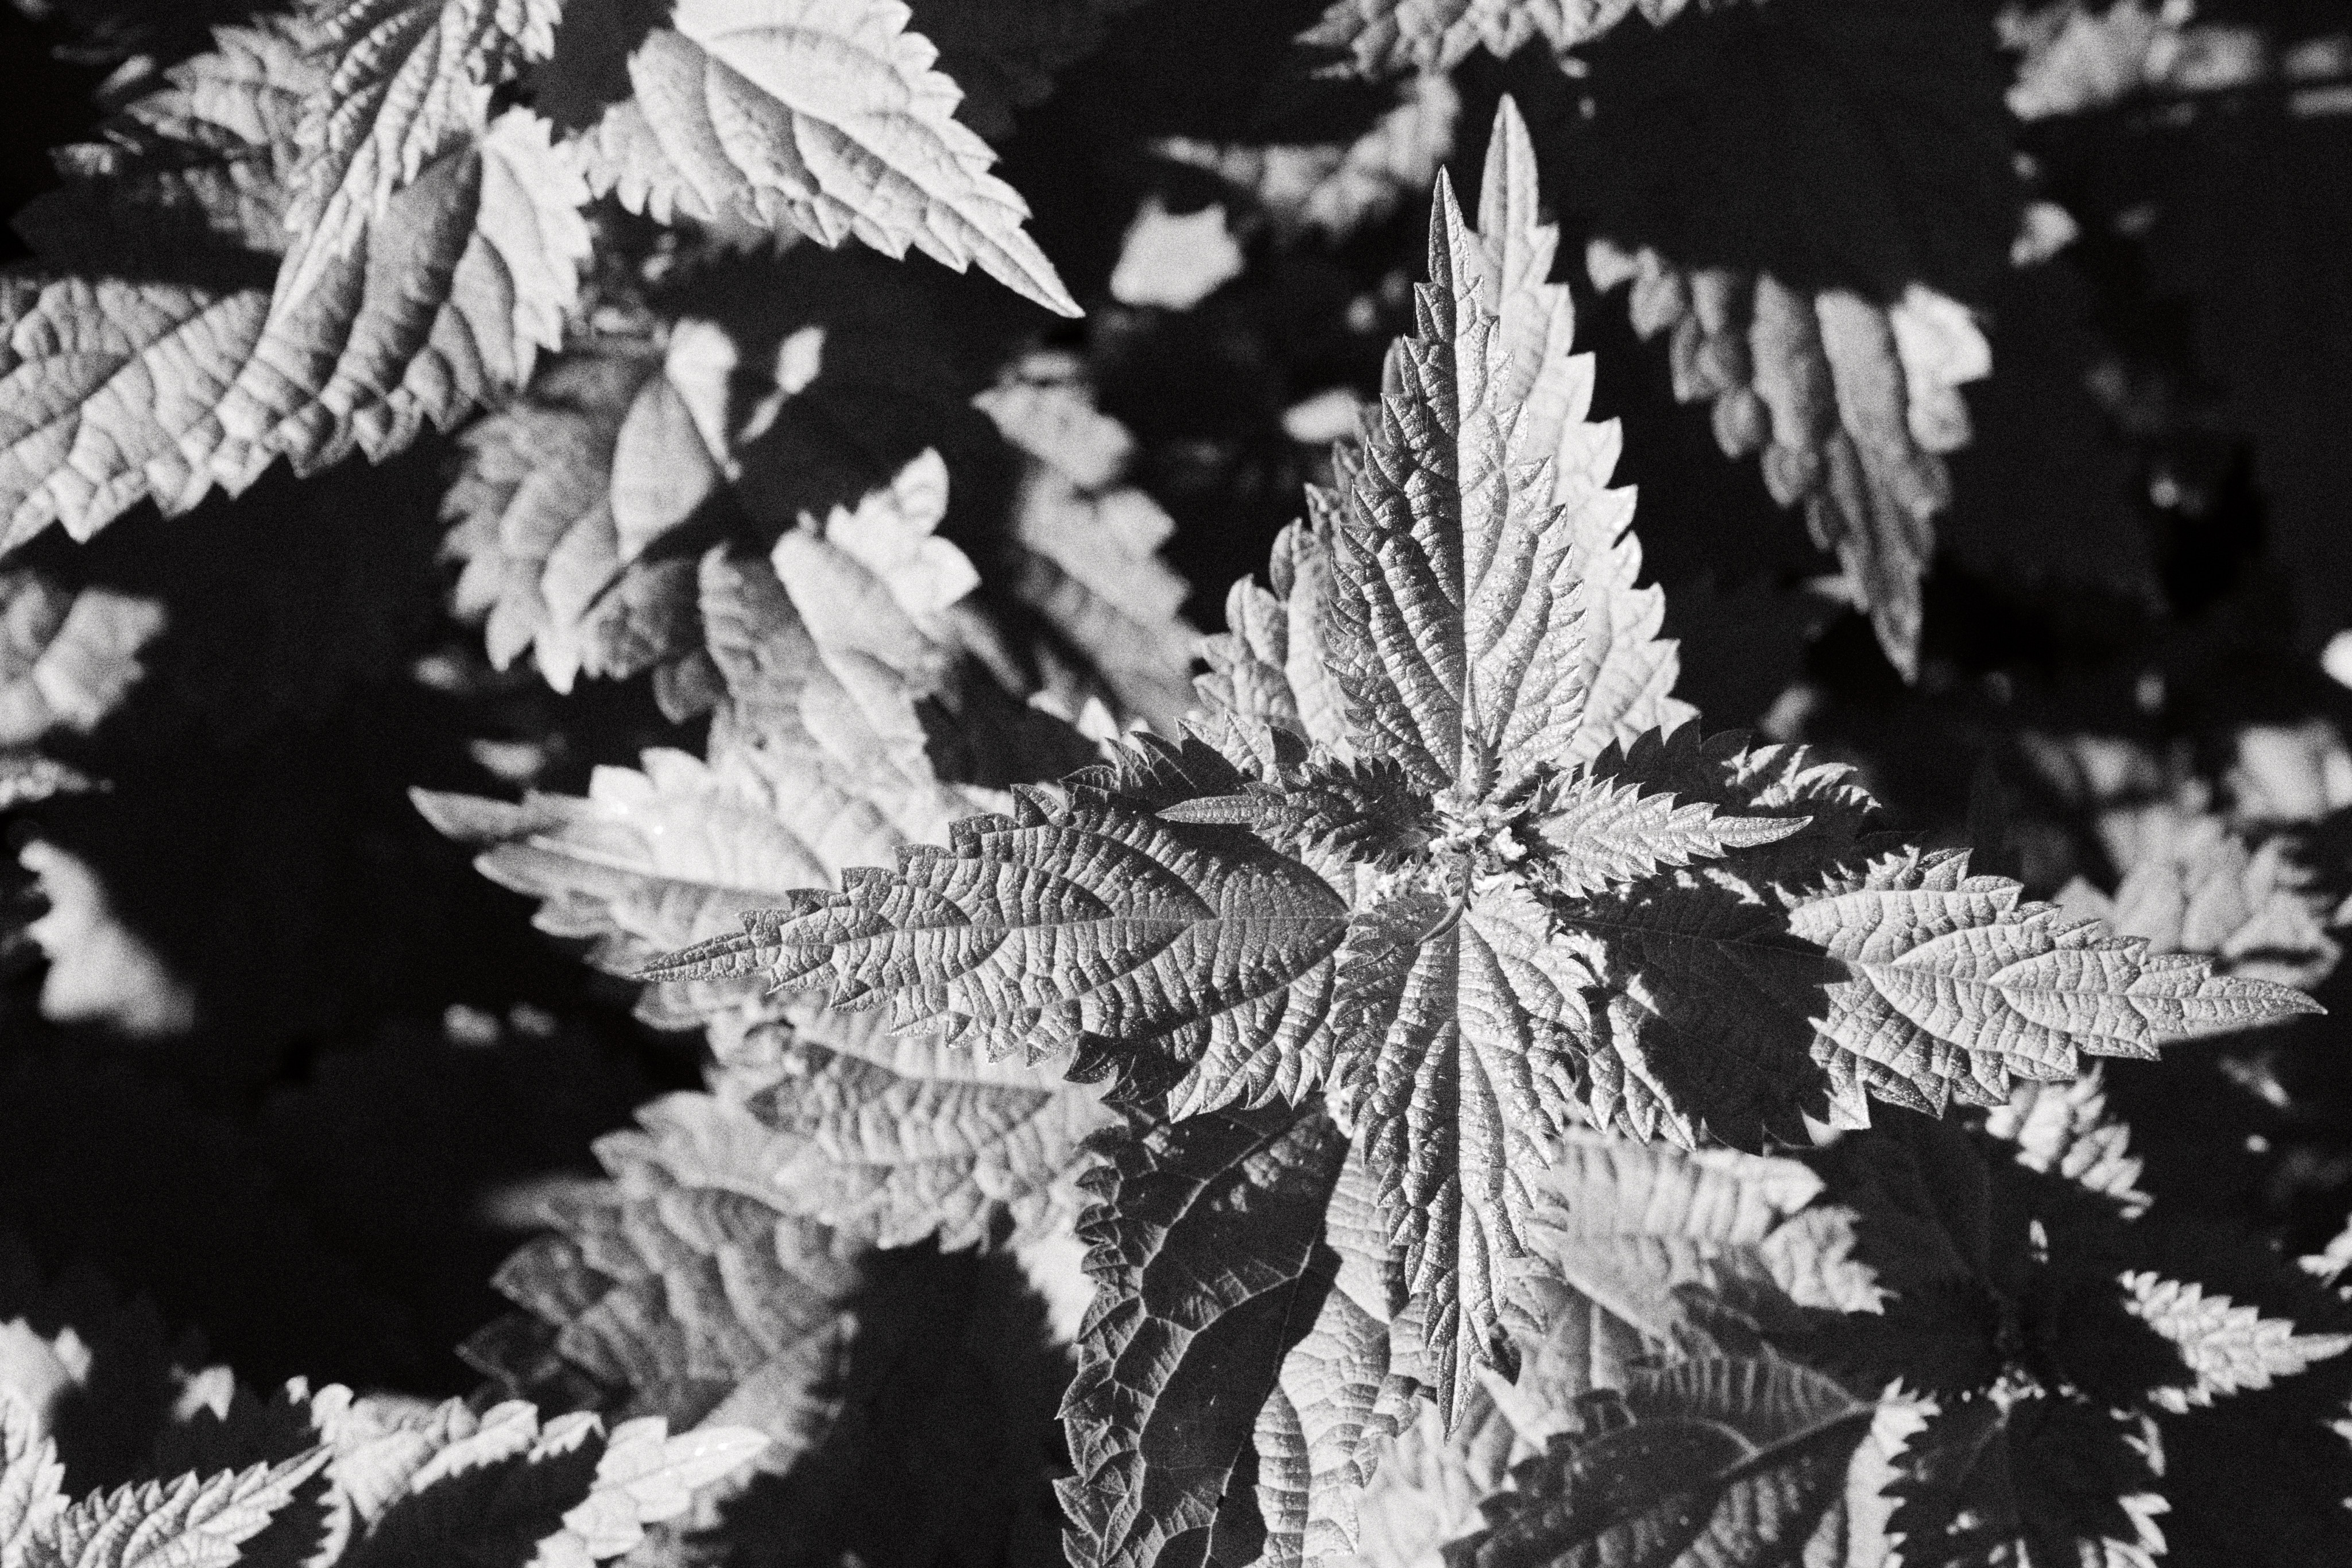 black and white photo of stinging nettle, lots of pretty lights and shadows making shapes. more of a texture photo than for the subject itself